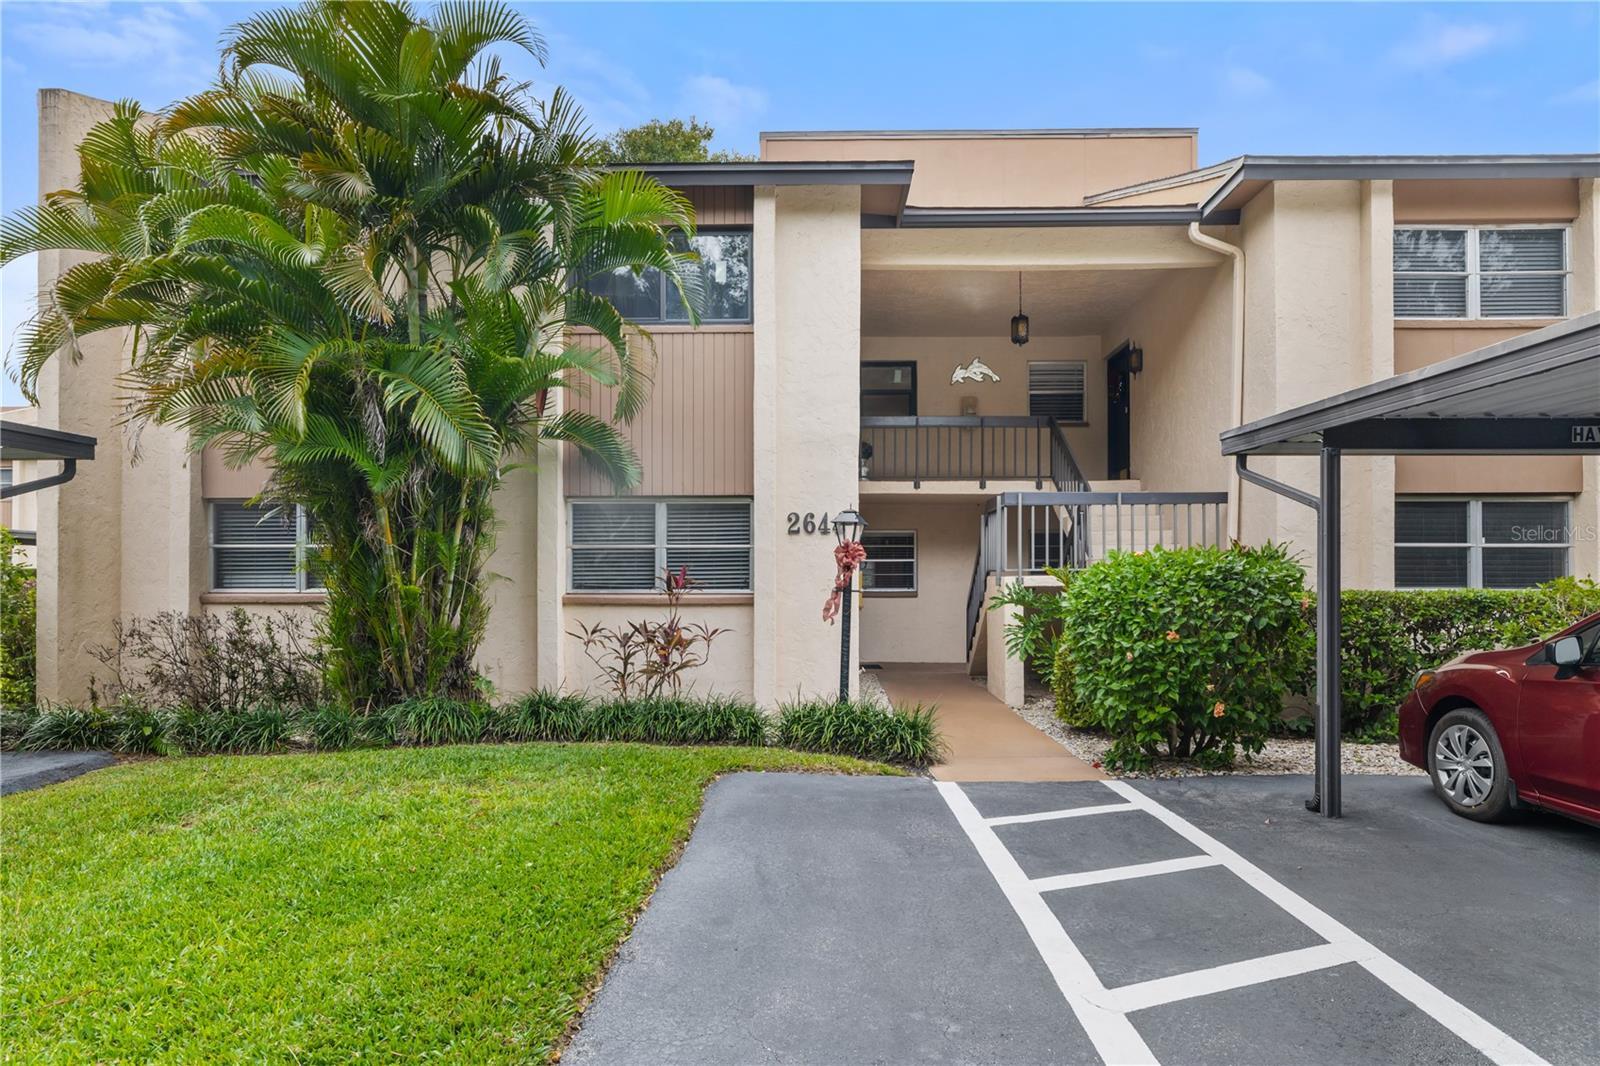 Photo one of 2644 Clubhouse Dr # 101 Sarasota FL 34232 | MLS A4592559